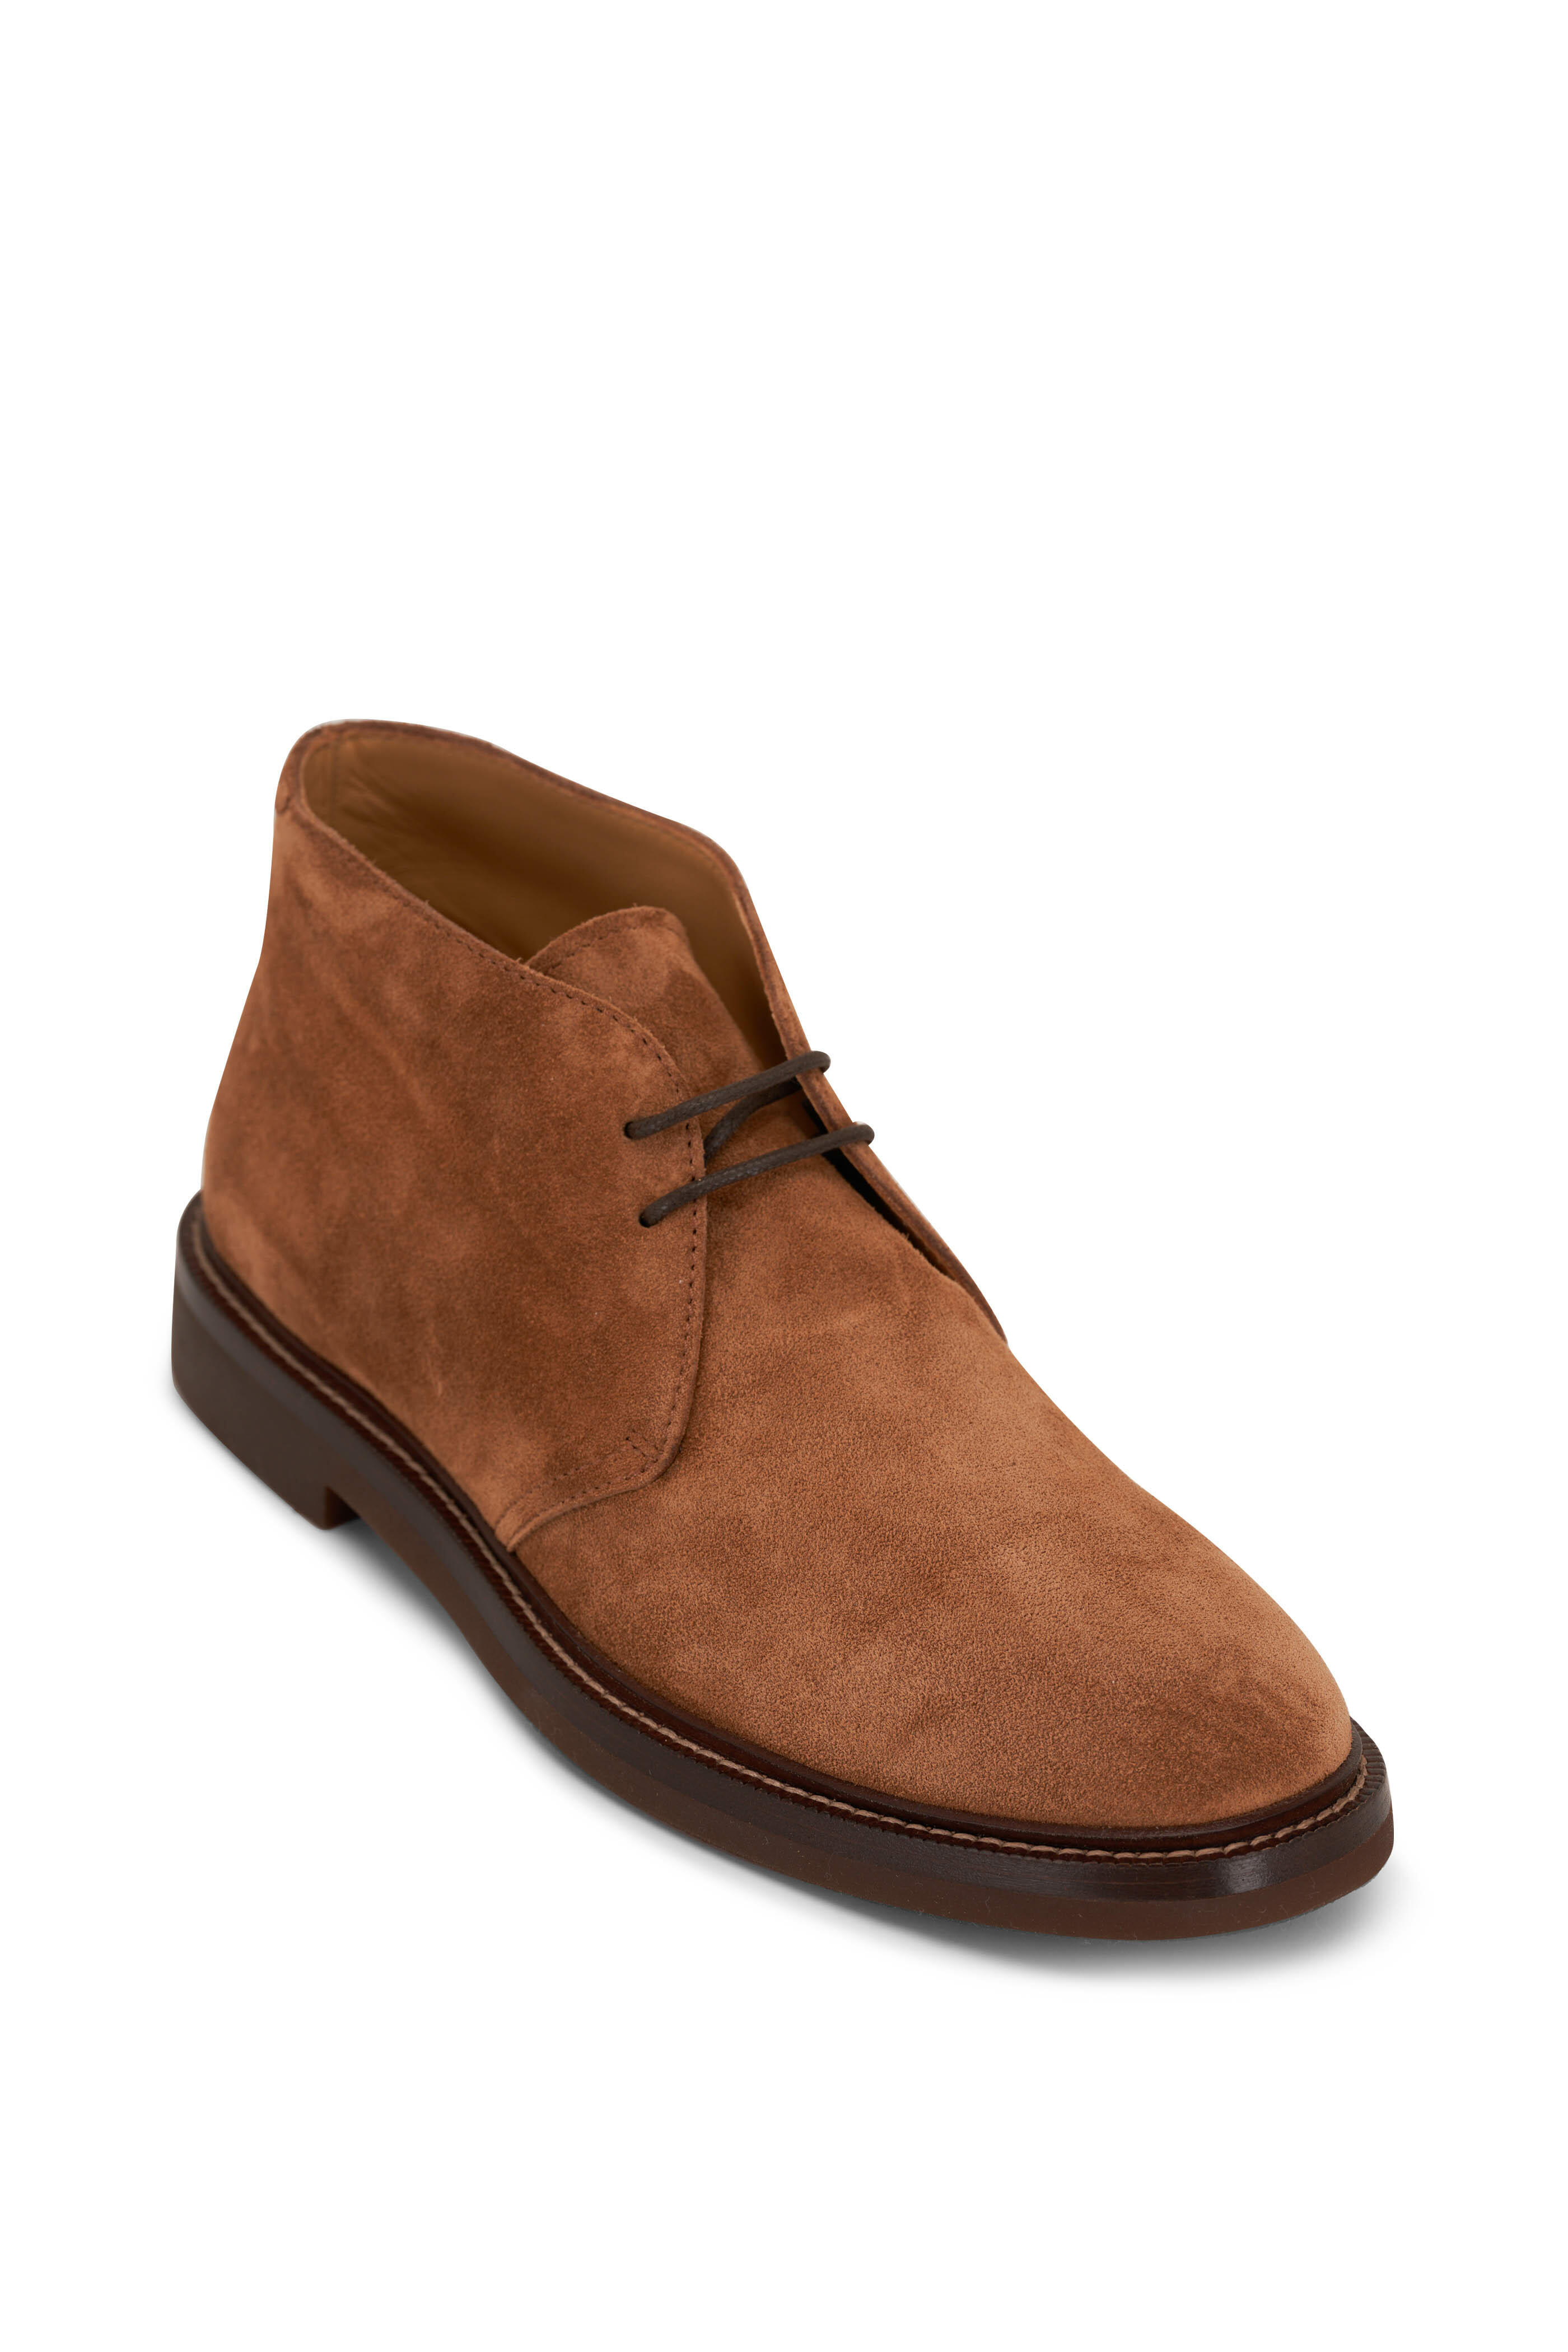 Lace-ups shoes Brunello Cucinelli - Desert shoes in brown